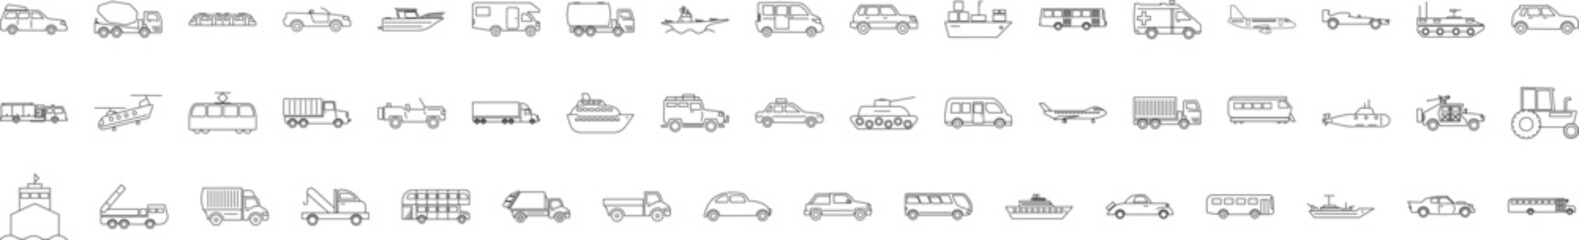 Transport icon collections vector design